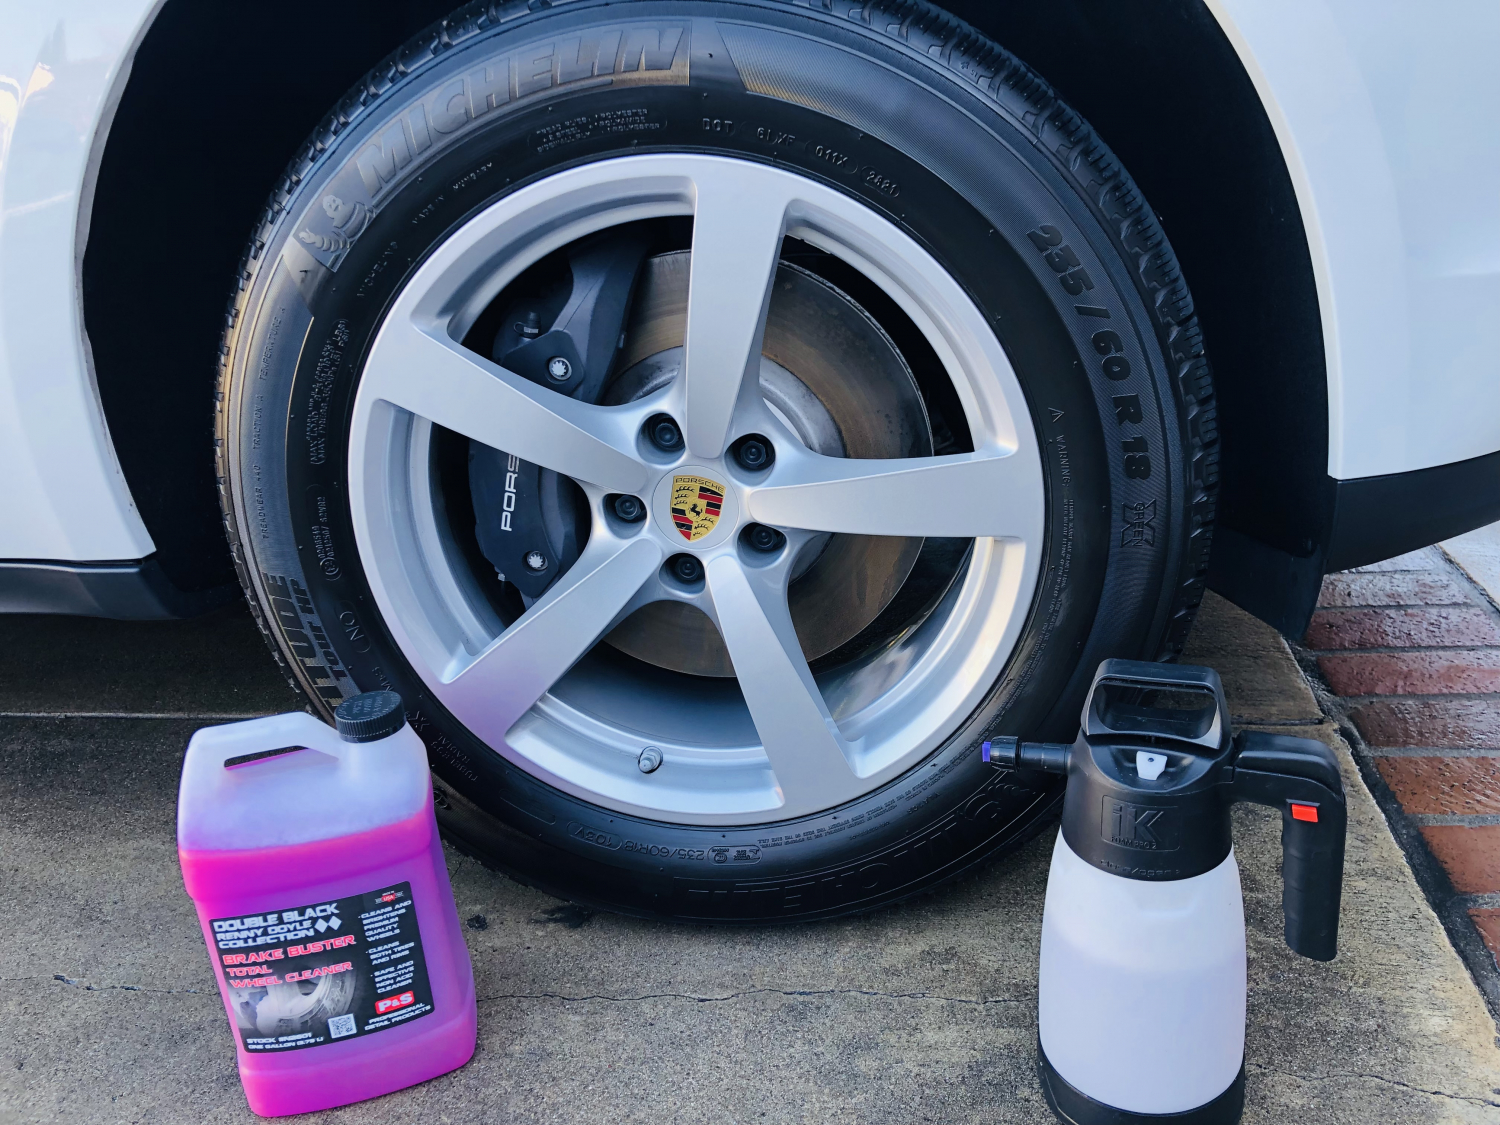  The Rag Company + P&S Detail Products - Brake Buster Wheel and  Tire Cleaner - Non-Acid Formula Safe for All Wheel Types, Removes Brake  Dust, Oil, Dirt, Light Corrosion (1 Gallon +